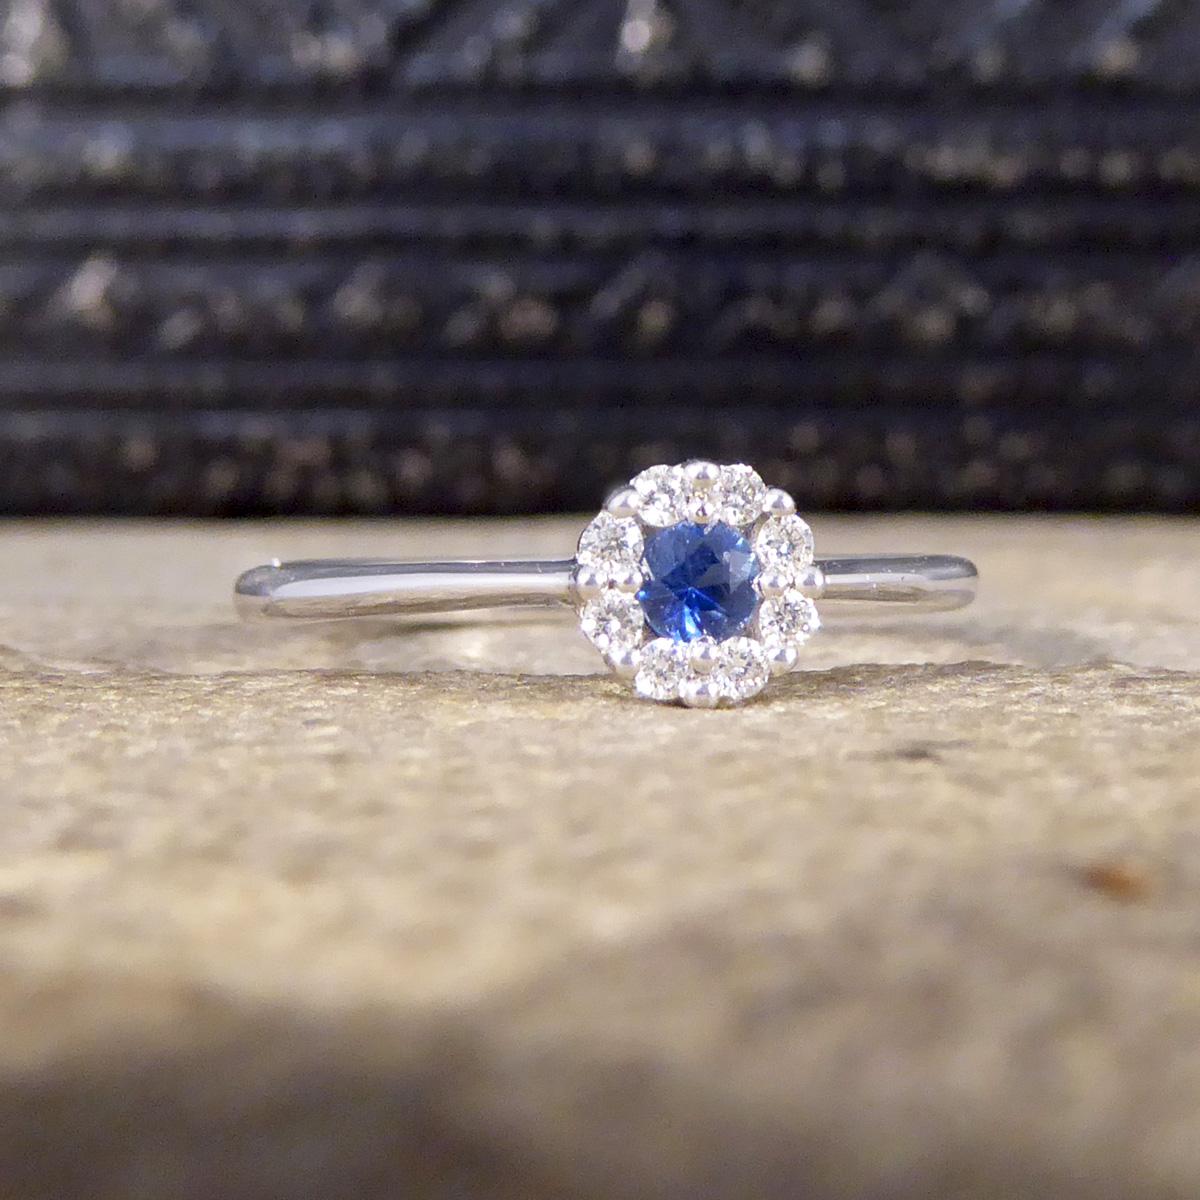 This lovely little ring has the perfect balance of elegance and quality. Crafted using 18ct White Gold this ring features a beautifully blue Sapphire in the centre weighing 0.11ct with a cluster surround of 0.08ct Brilliant Cut Diamonds set in